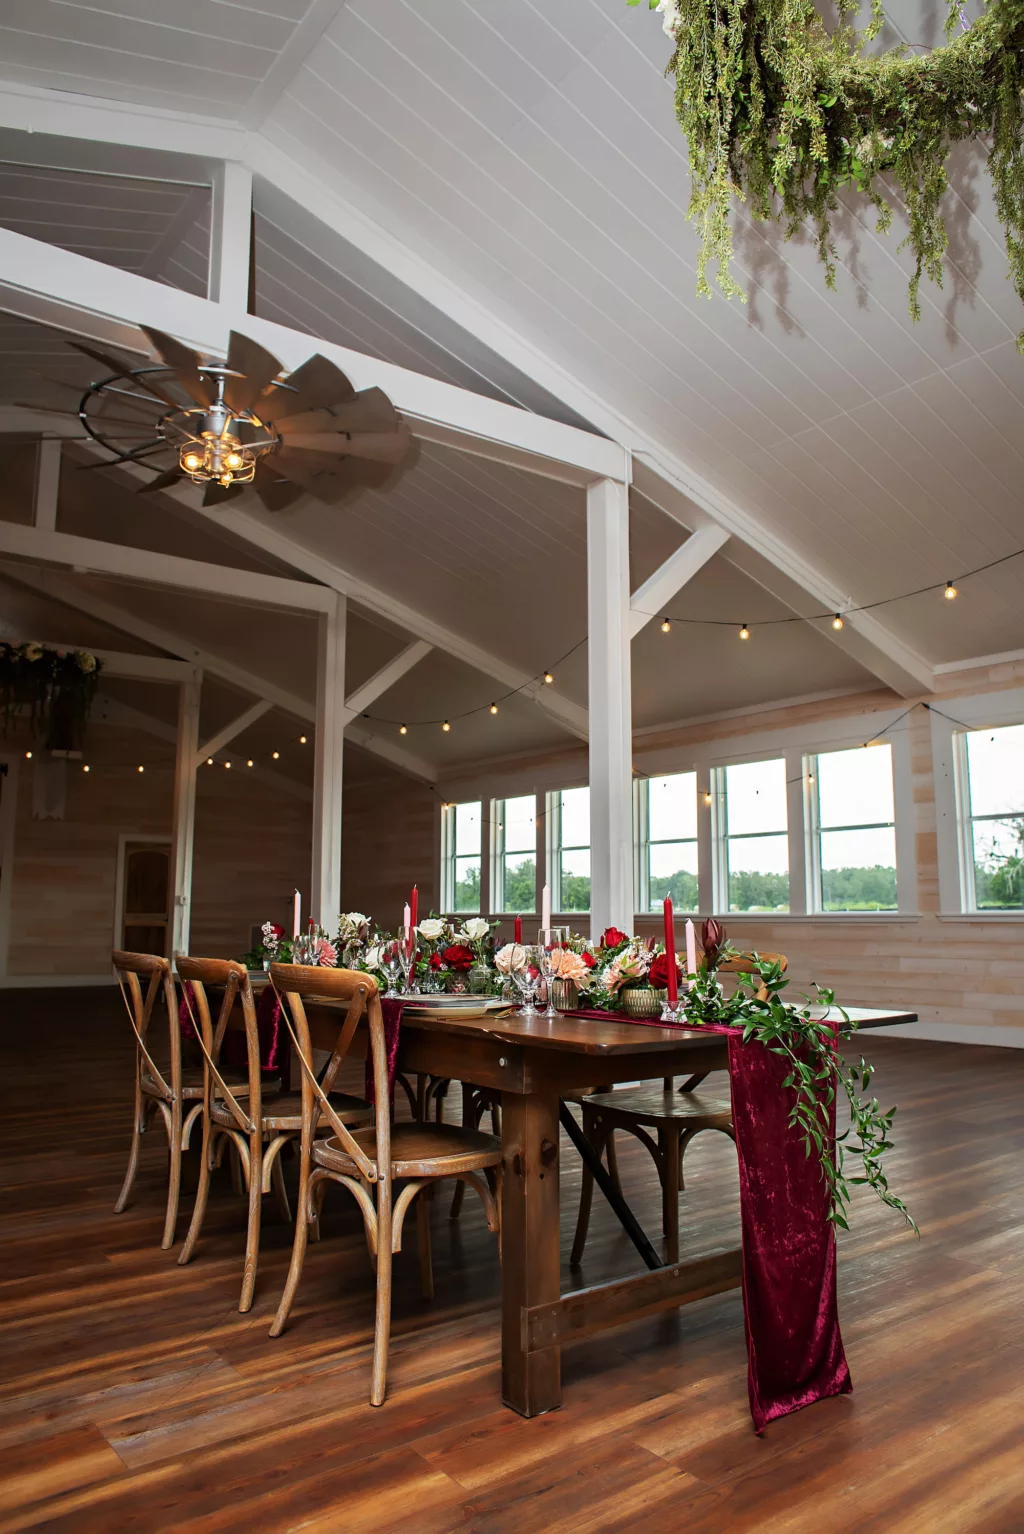 Burgundy Fall Legacy Barn Wedding Reception Inspiration | Rustic Wooden Table | Red and White Taper Candles, Greenery Garland, and Velvet Table Runner Centerpiece Decor Ideas | Tampa Bay Event Venue Legacy Lane Weddings | Tampa Florist Save The Date Florida